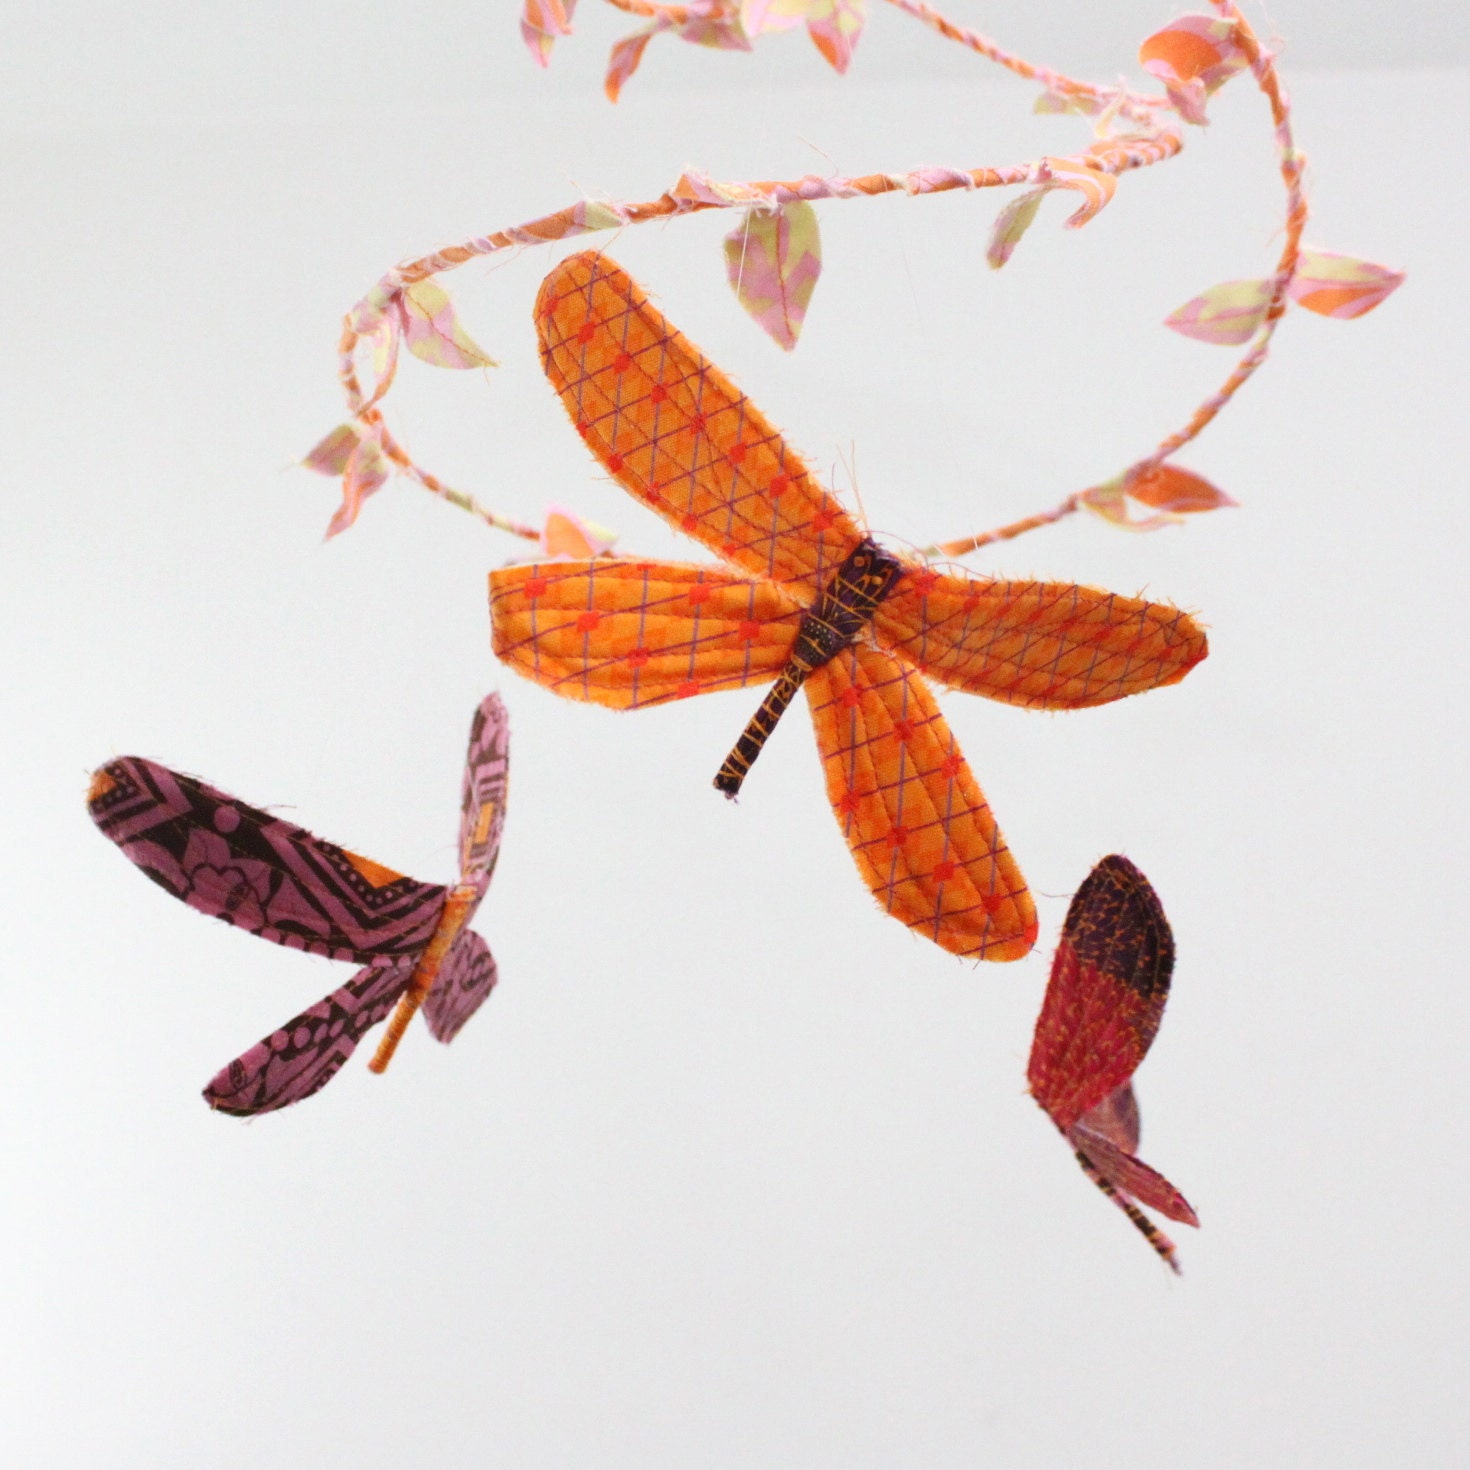 3 dragonflies dream of spring - fabric mobile in peach, orange, crimson red, pink, and purple